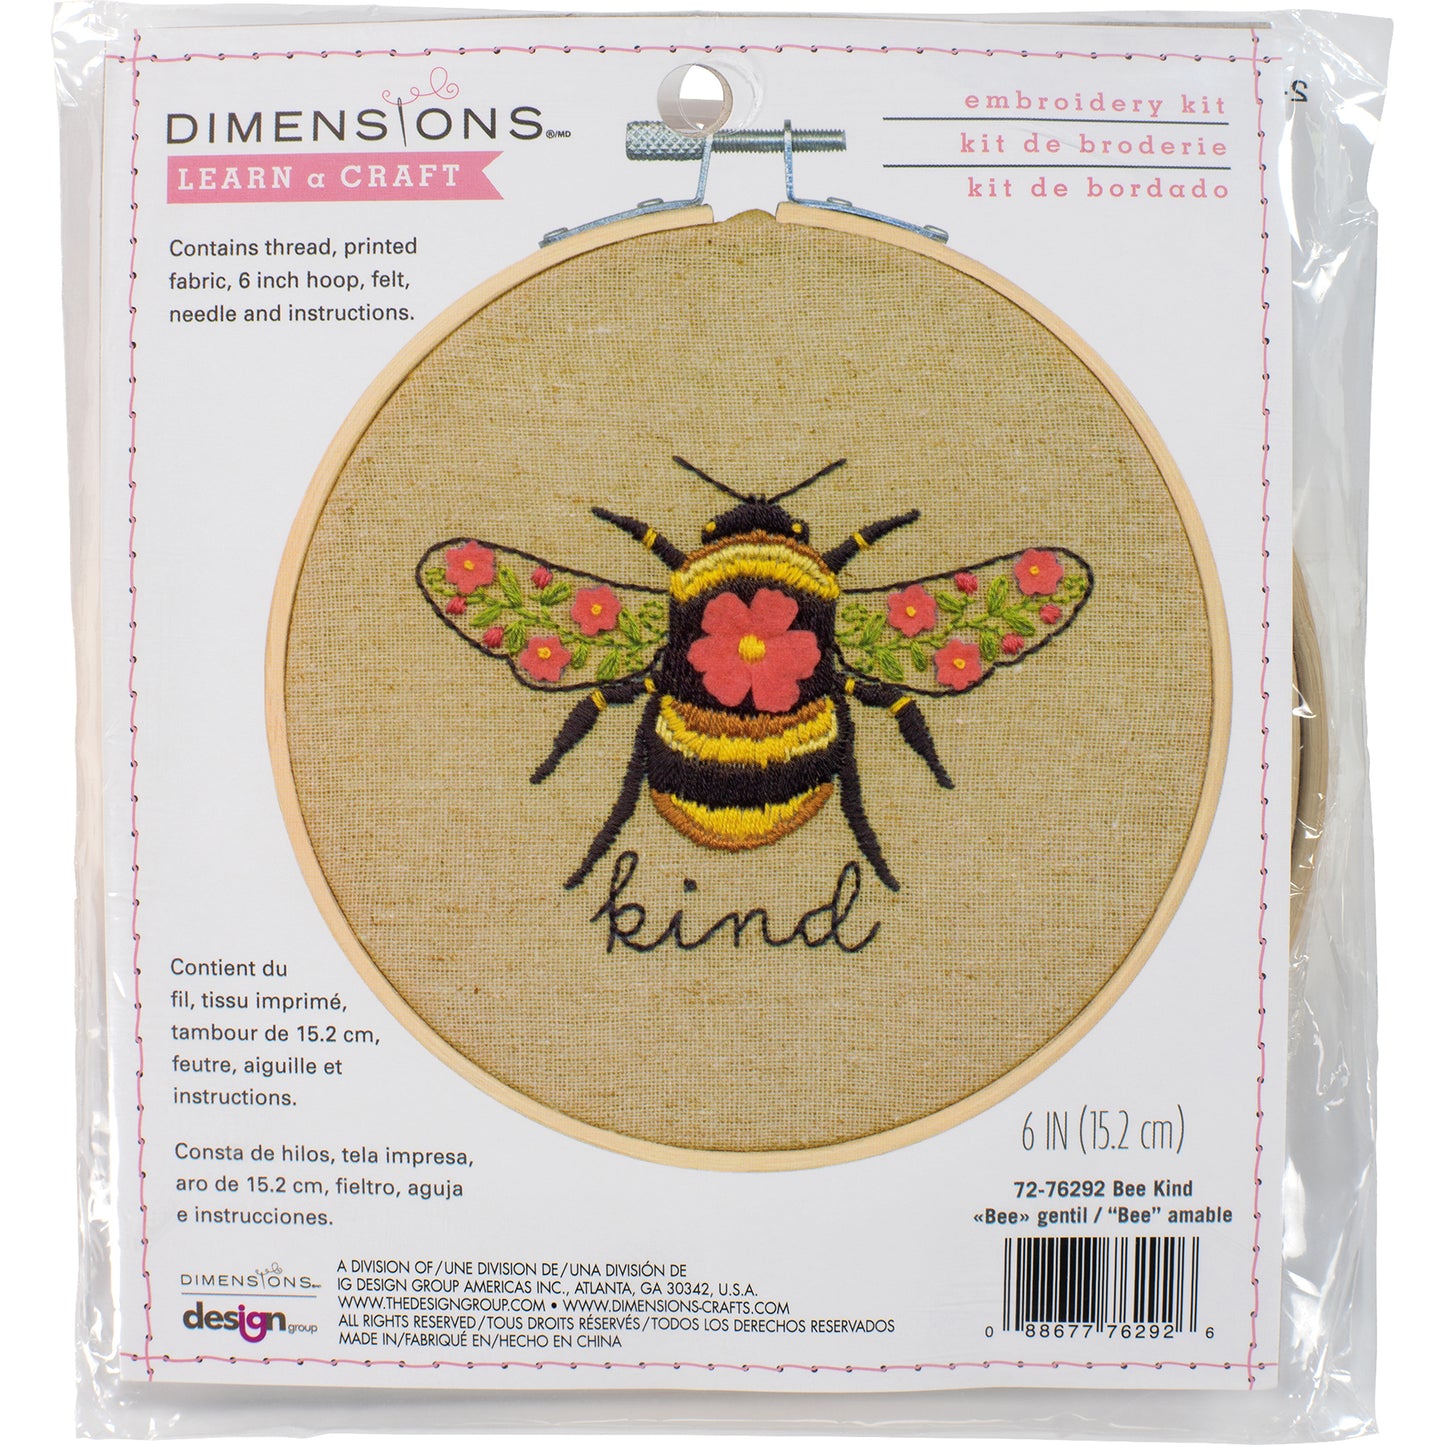 Dimension Learn a Craft Embroidery Kit - "Bee Kind"